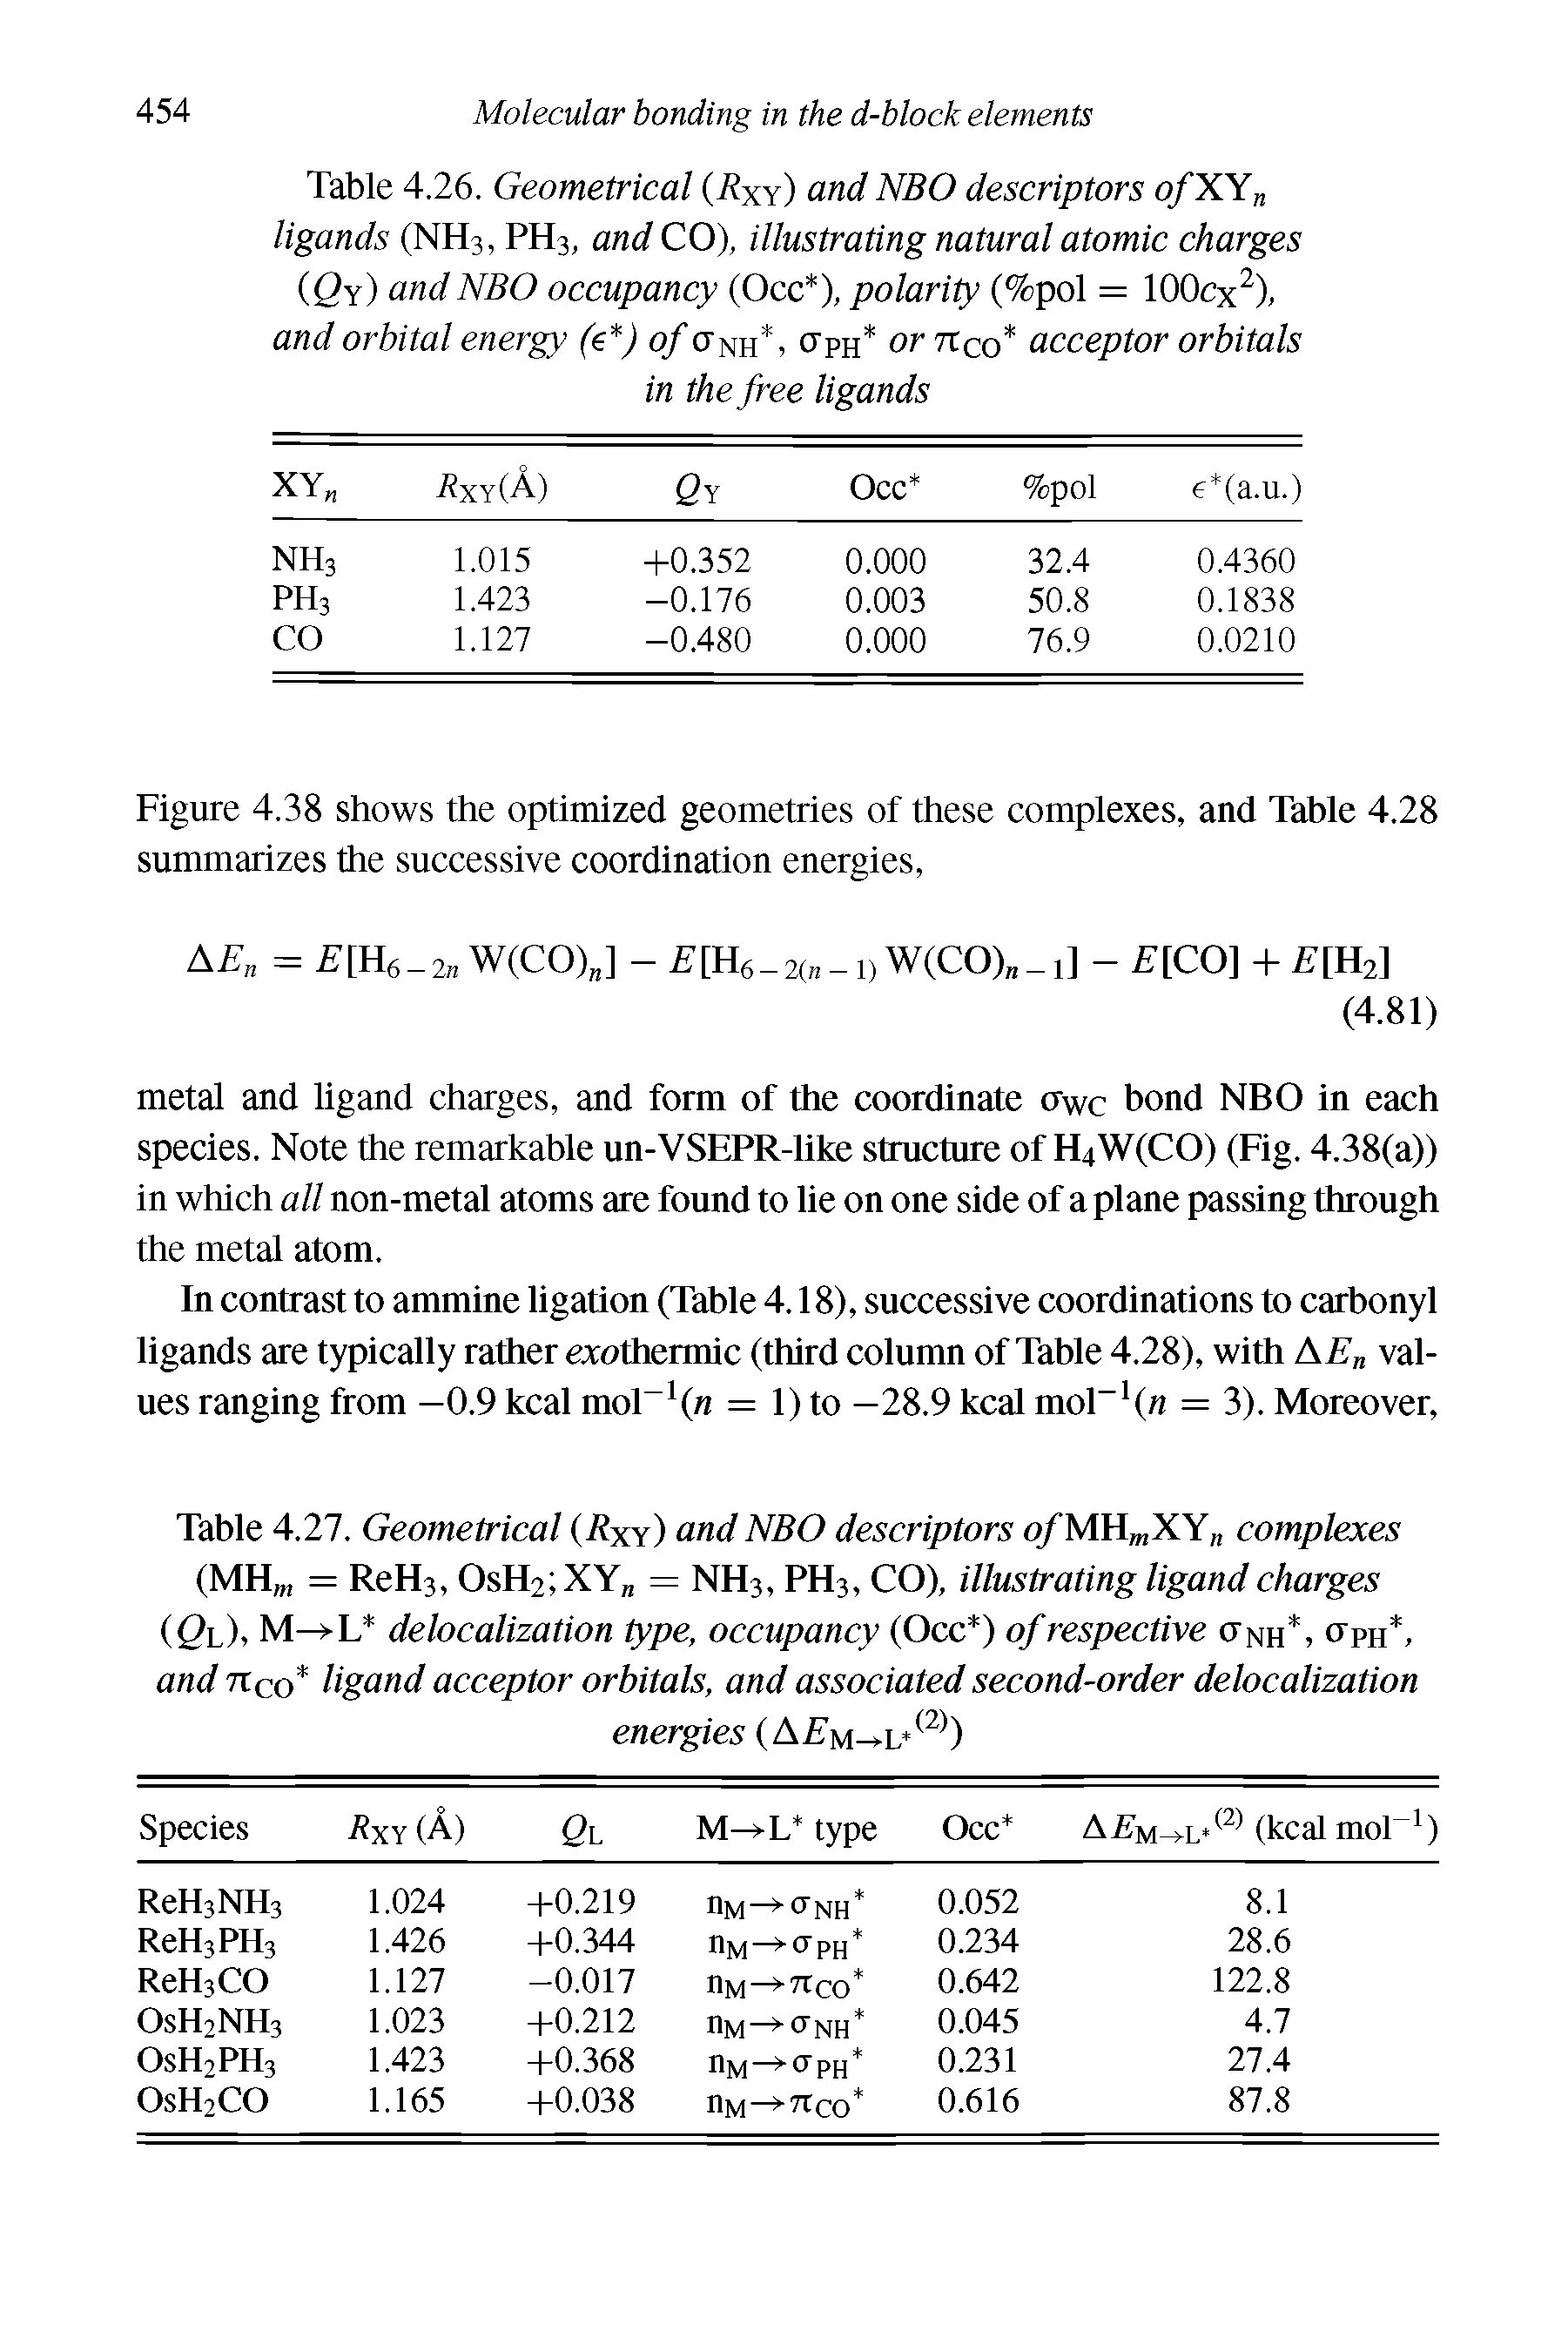 Table 4.26. Geometrical (Rxy) and NBO descriptors ofXYn ligands (NH3, PH3, and CO), illustrating natural atomic charges (Qy) and NBO occupancy (Occ ), polarity (%pol = lOOcx2), and orbital energy (e ) of Unh, apn or rtco acceptor orbitals in the free ligands...